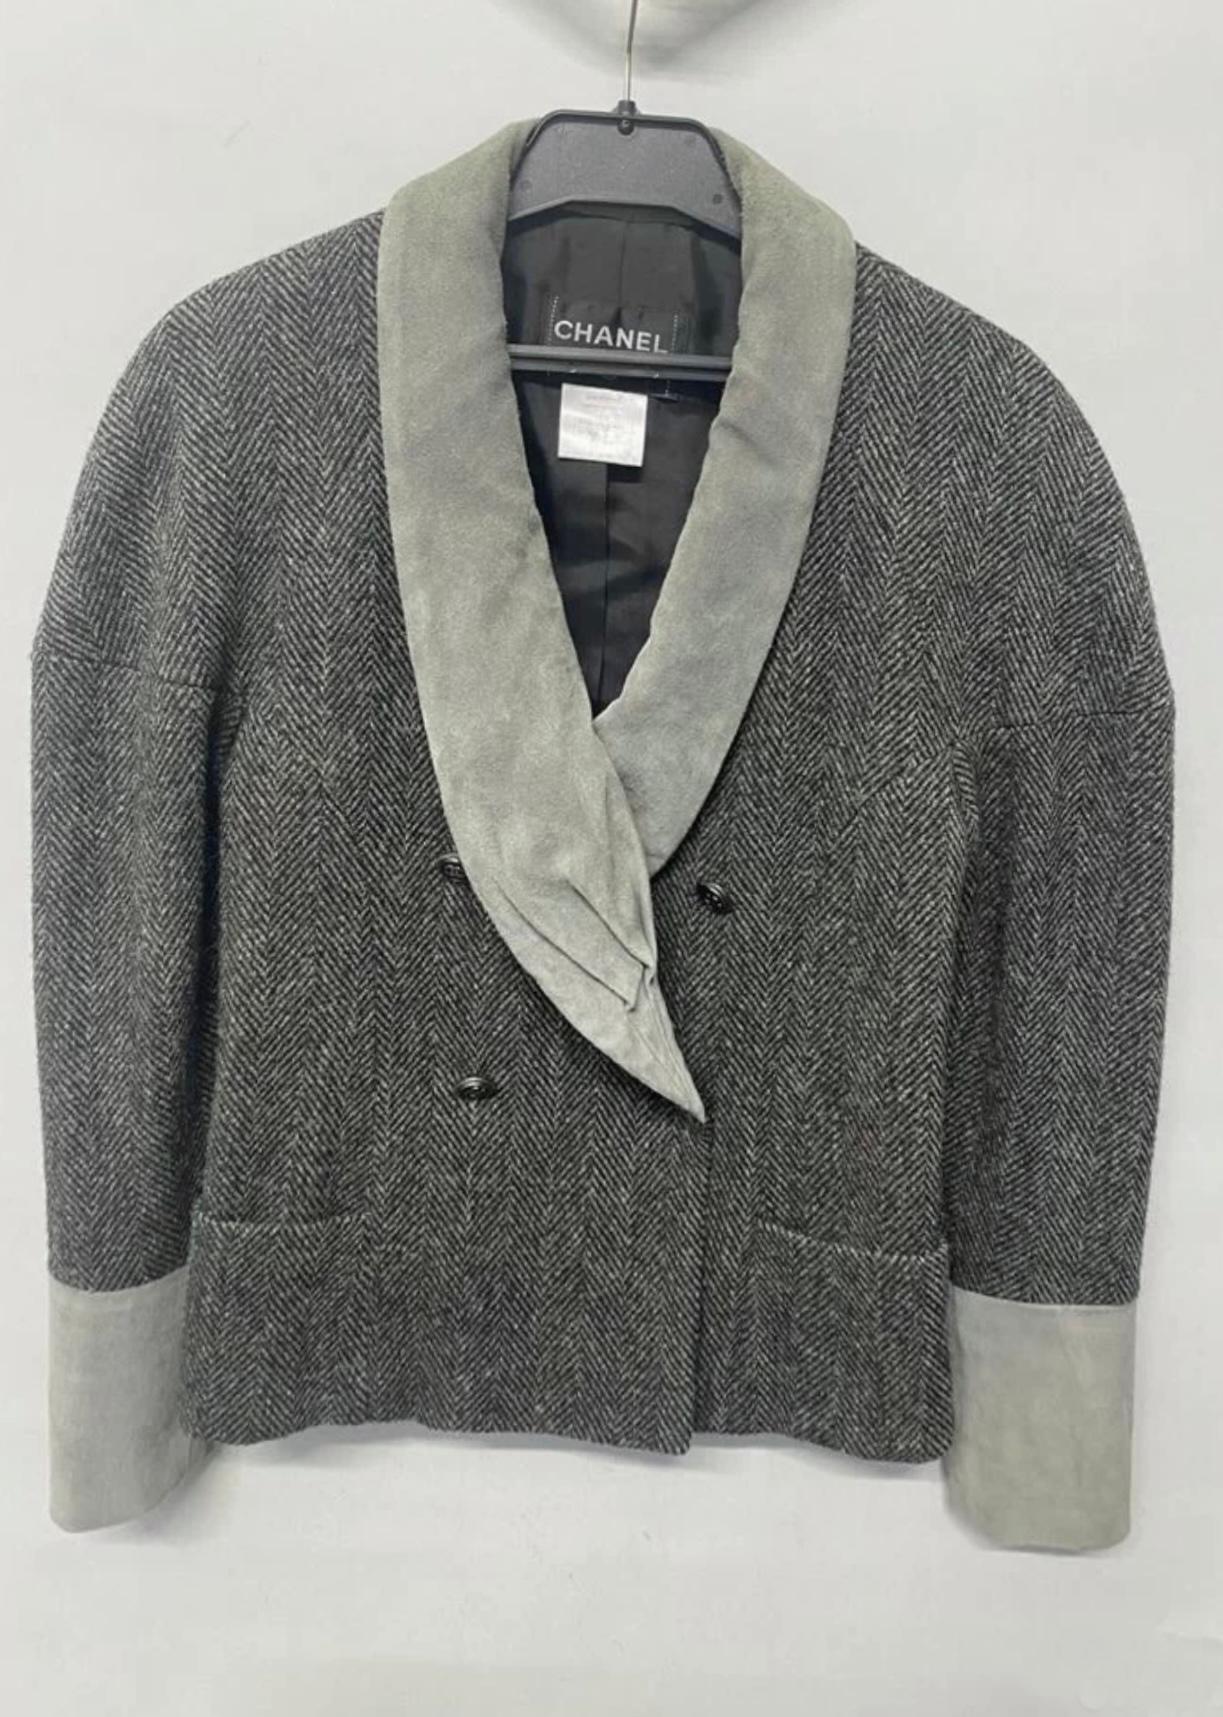 Chanel grey tweed jacket with suede accents at collar.
Size mark 40 FR. Excellent condition.
- CC logo buttons
- chevron pattern
- silk lining